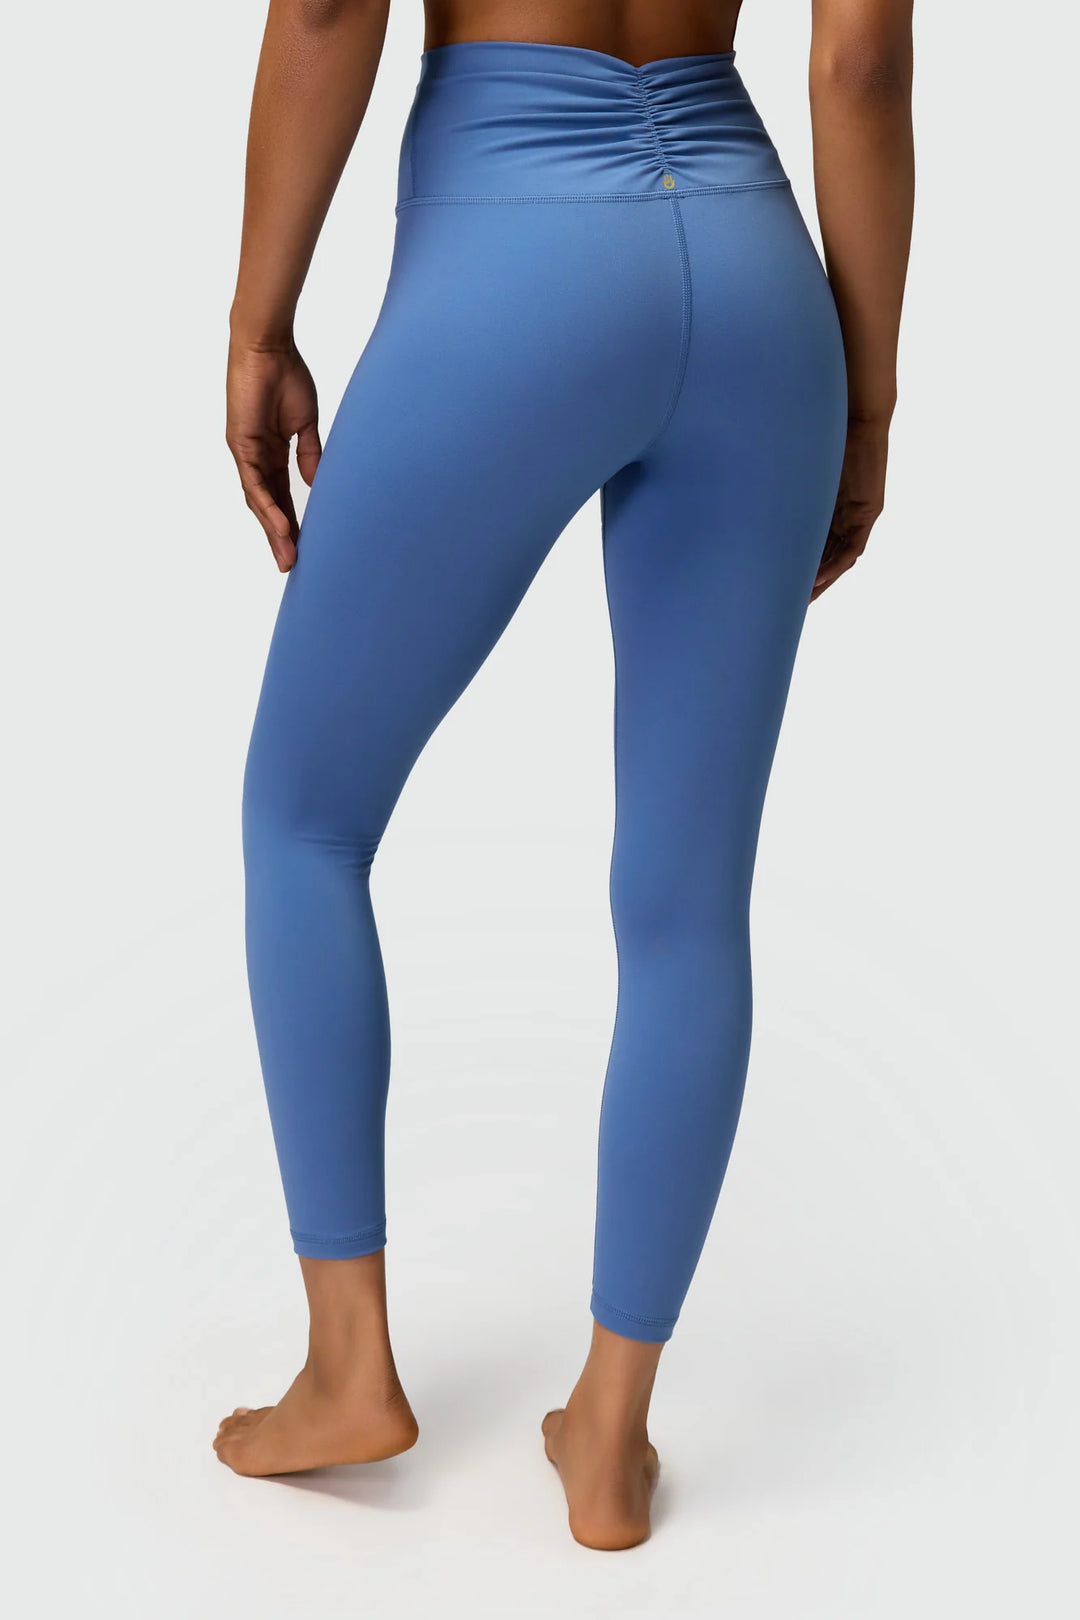 Spiritual Gangster Everly Cinched Waist Legging - Pacific Blue - Sun Diego Boardshop